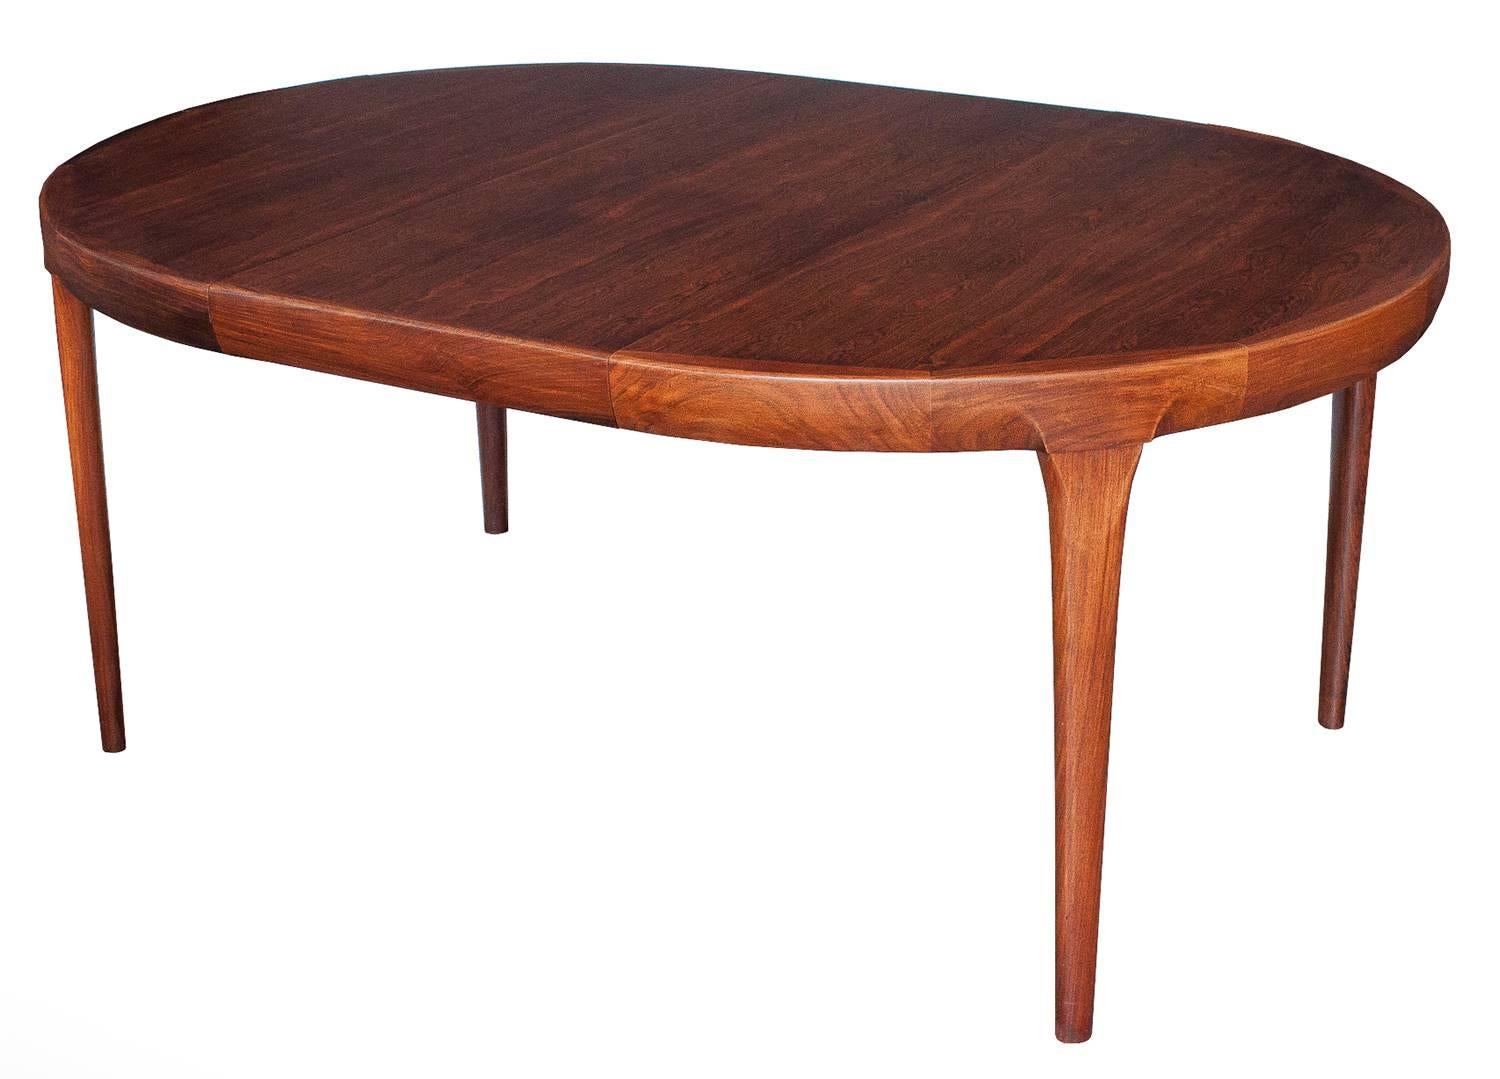 Rosewood dining table by Ib Kofod-Larsen with two 19.75